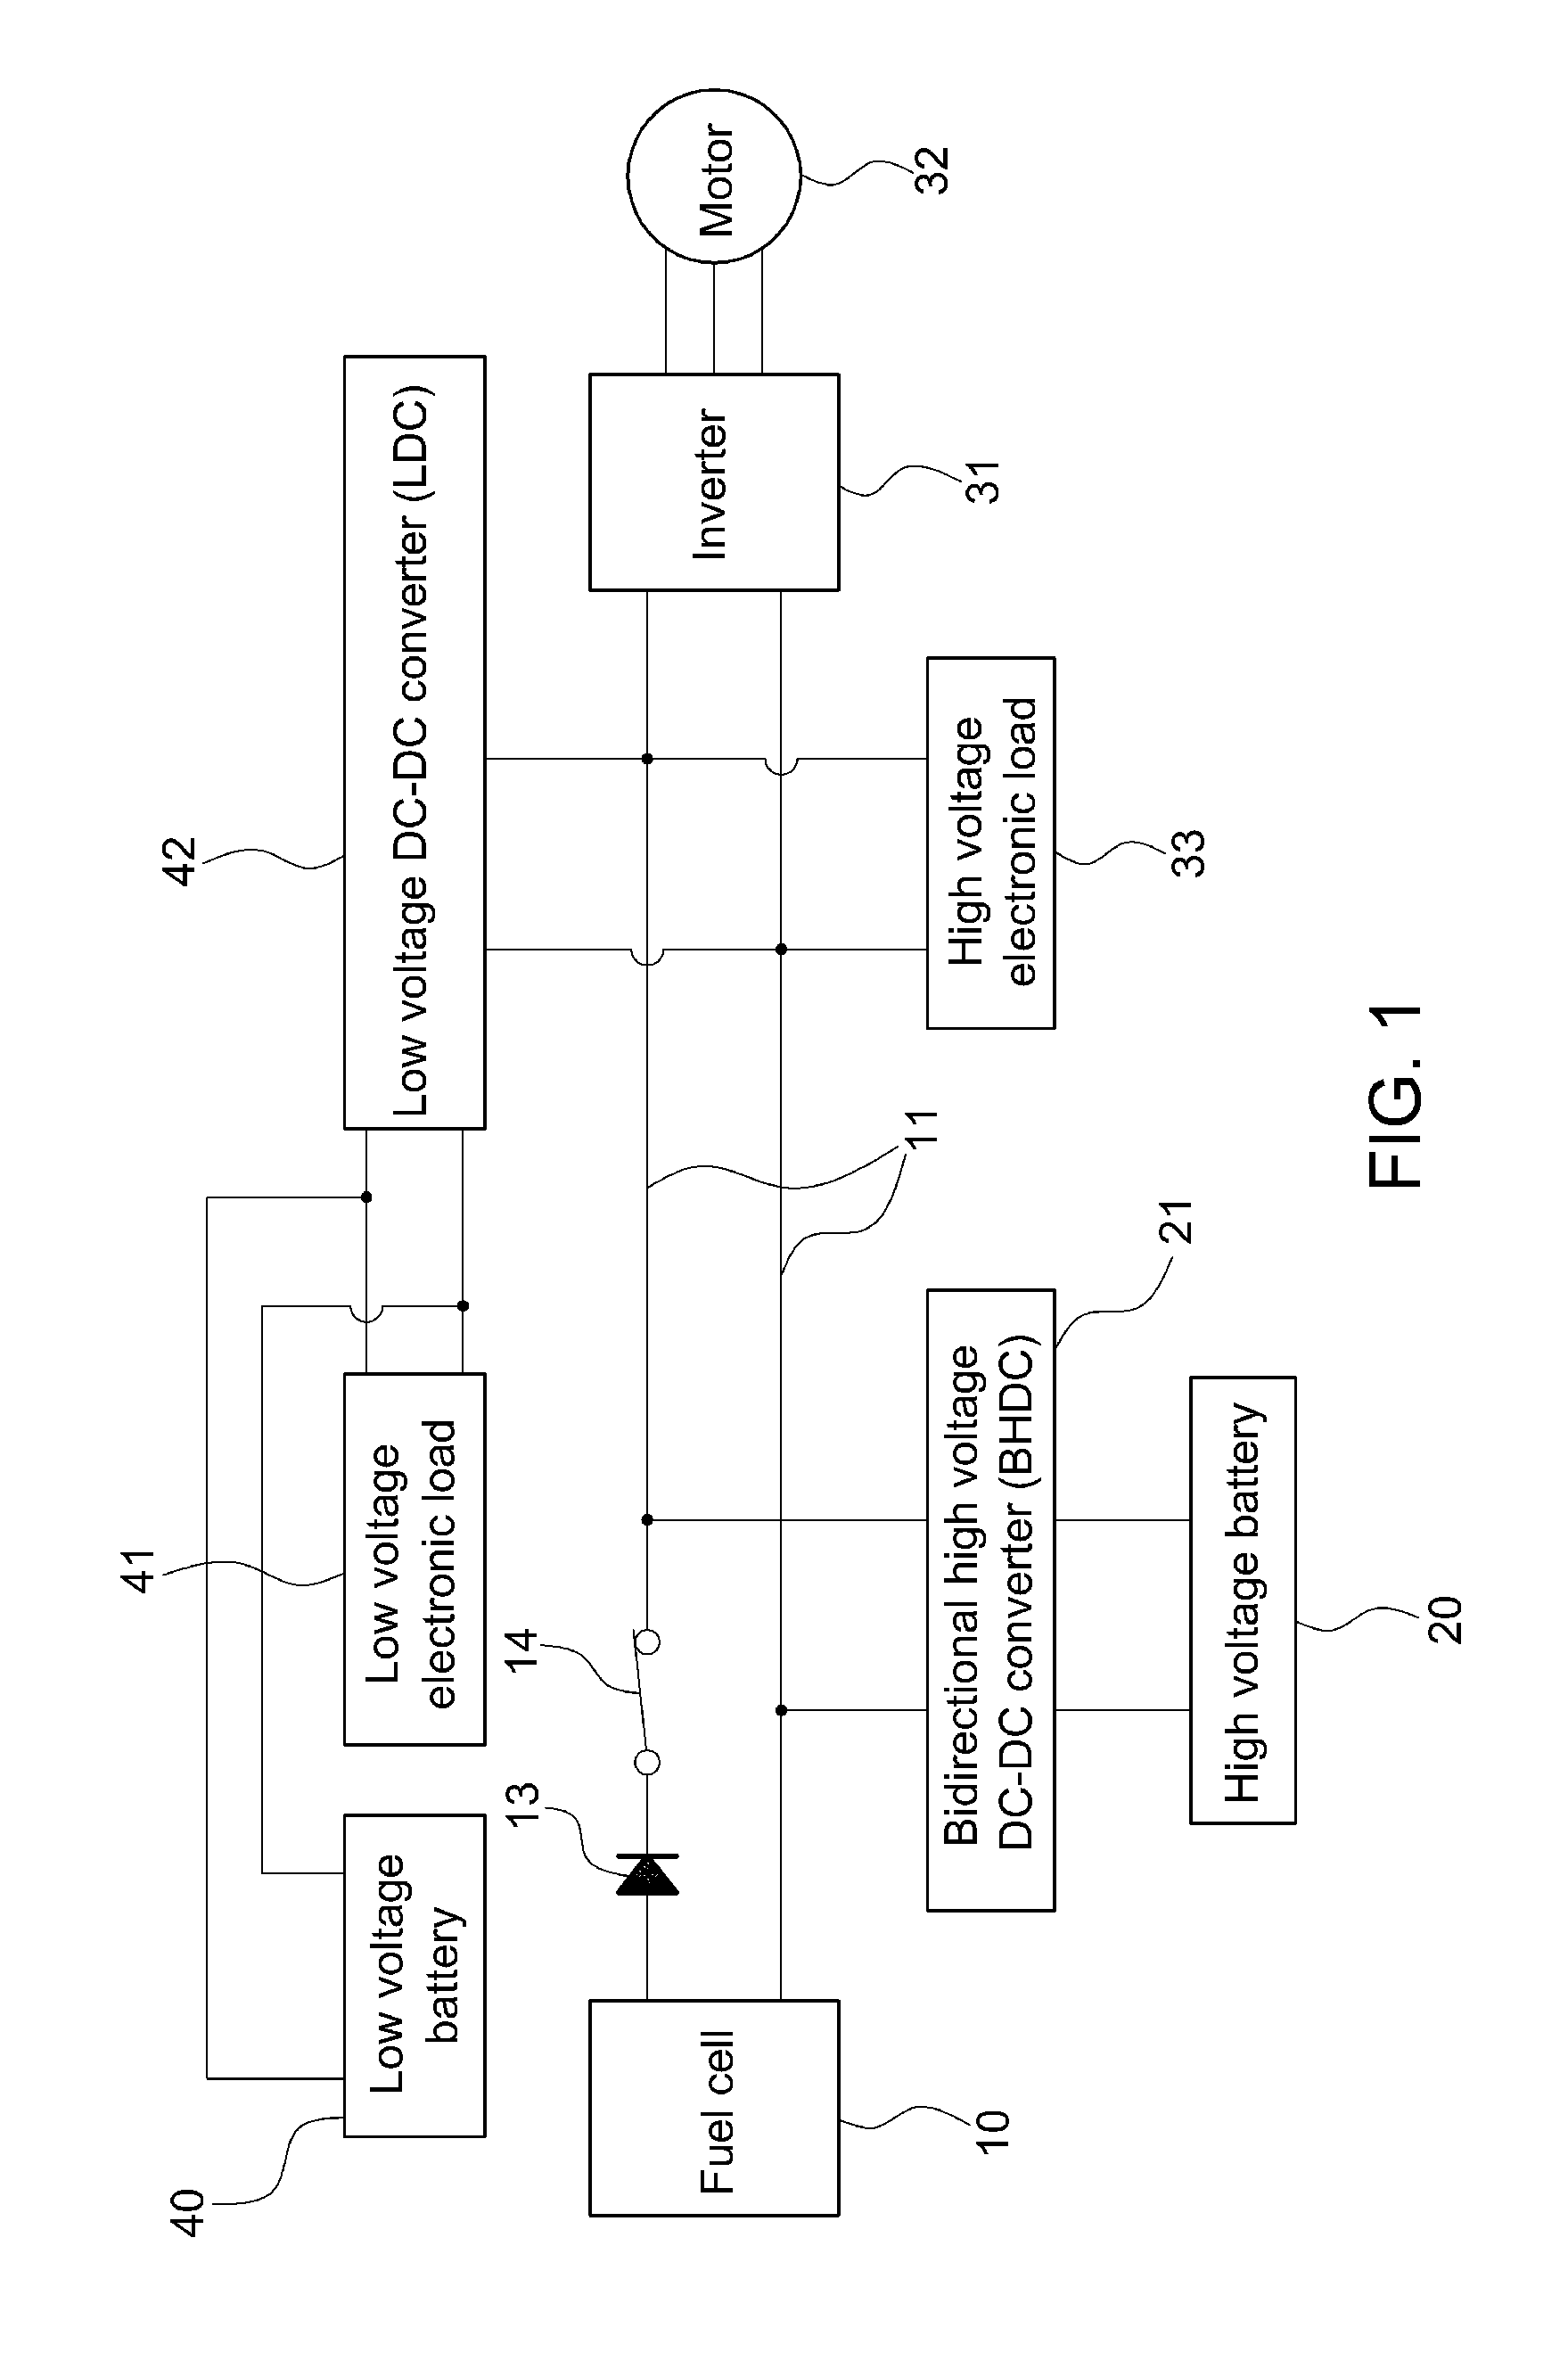 System and method for controlling operation of fuel cell hybrid system by switching to battery power in response to idle stop condition